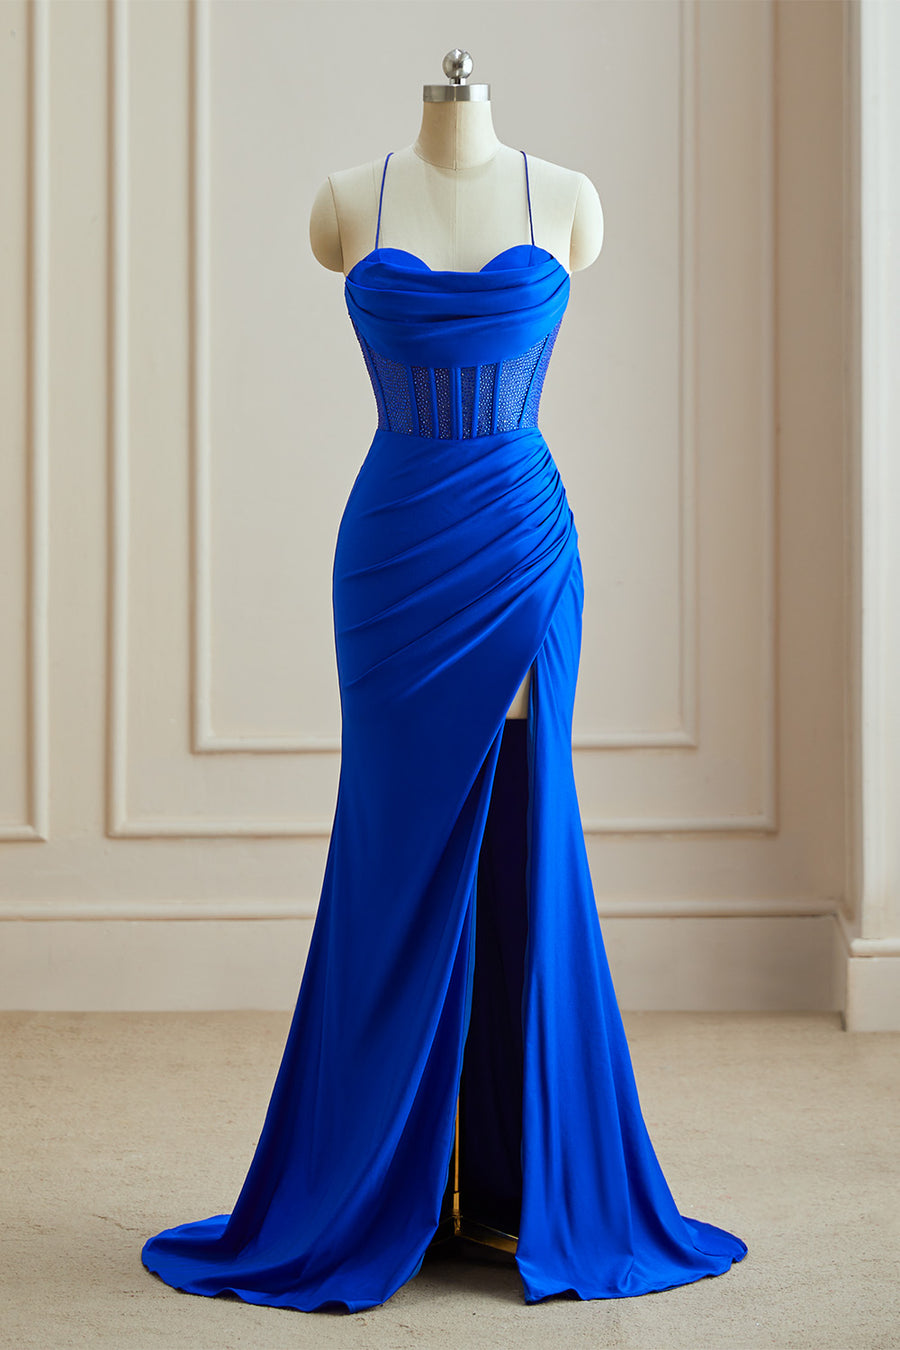 Find the Perfect Prom Dress for Women & Teens - Prom Dresses